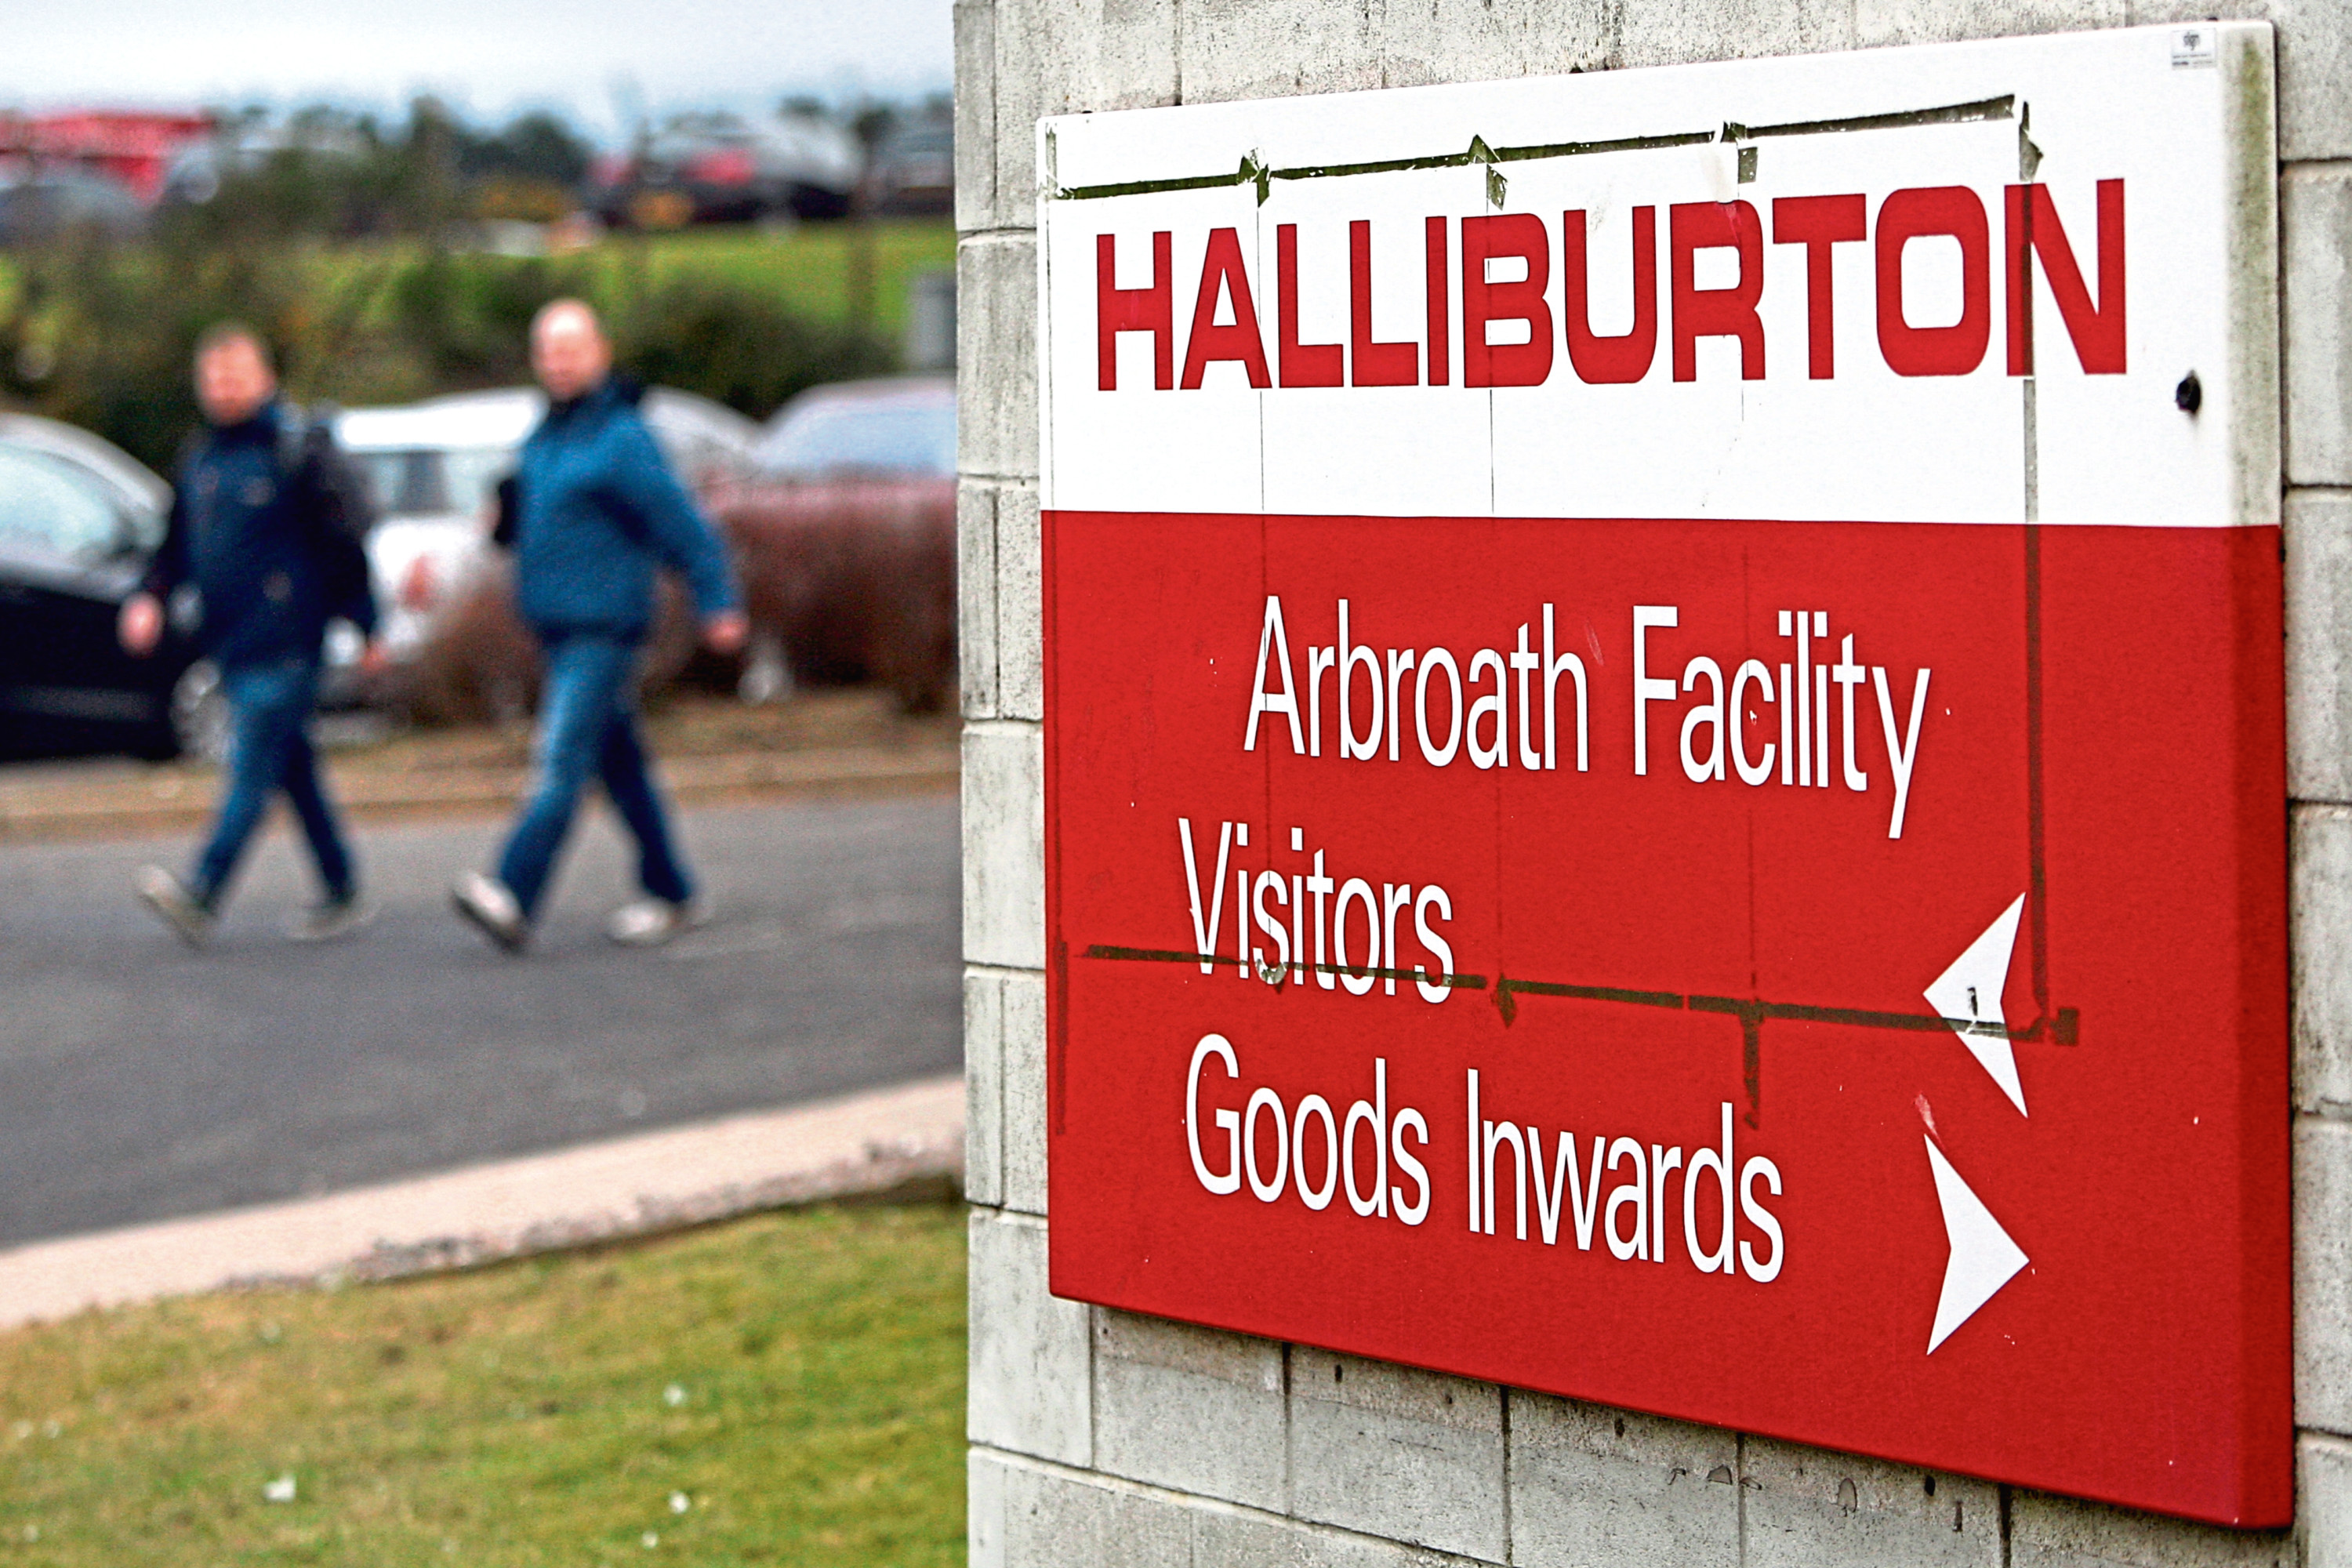 Kris Miller, Courier, 18/02/15. Picture today at the Halliburton Arbroath Facility for story out job losses due to low price of oil. Pic shows workers leaving the Arbroath plant today.